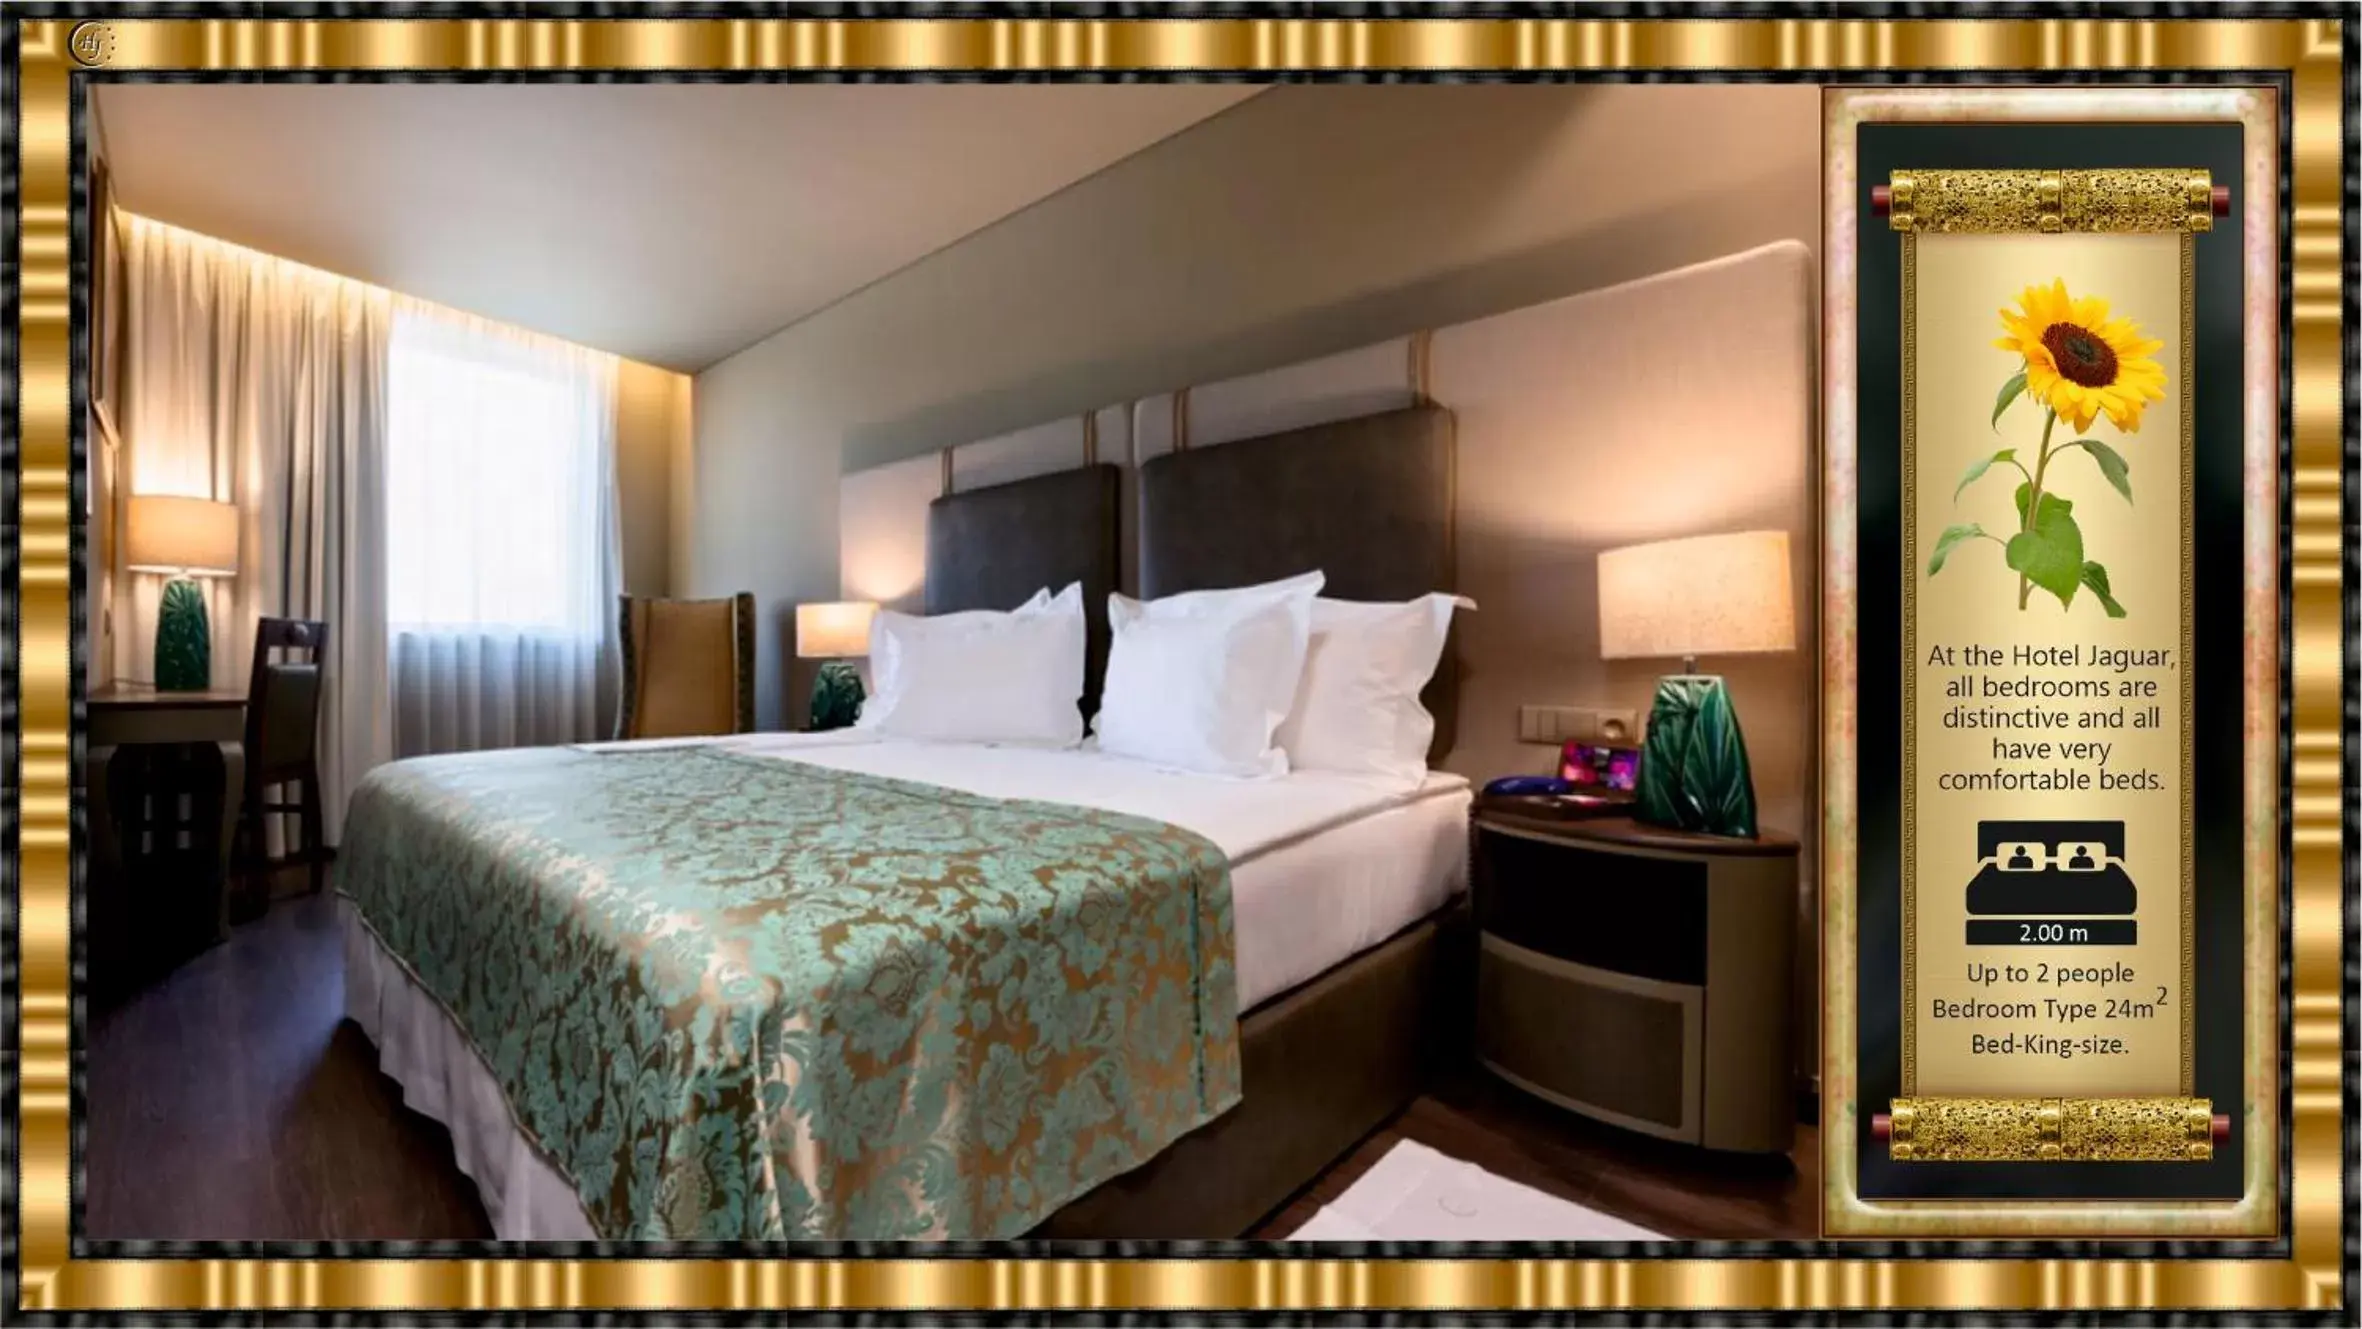 Bed in Hotel Jaguar Oporto - Airport to Hotel and City is a free Shuttle Service